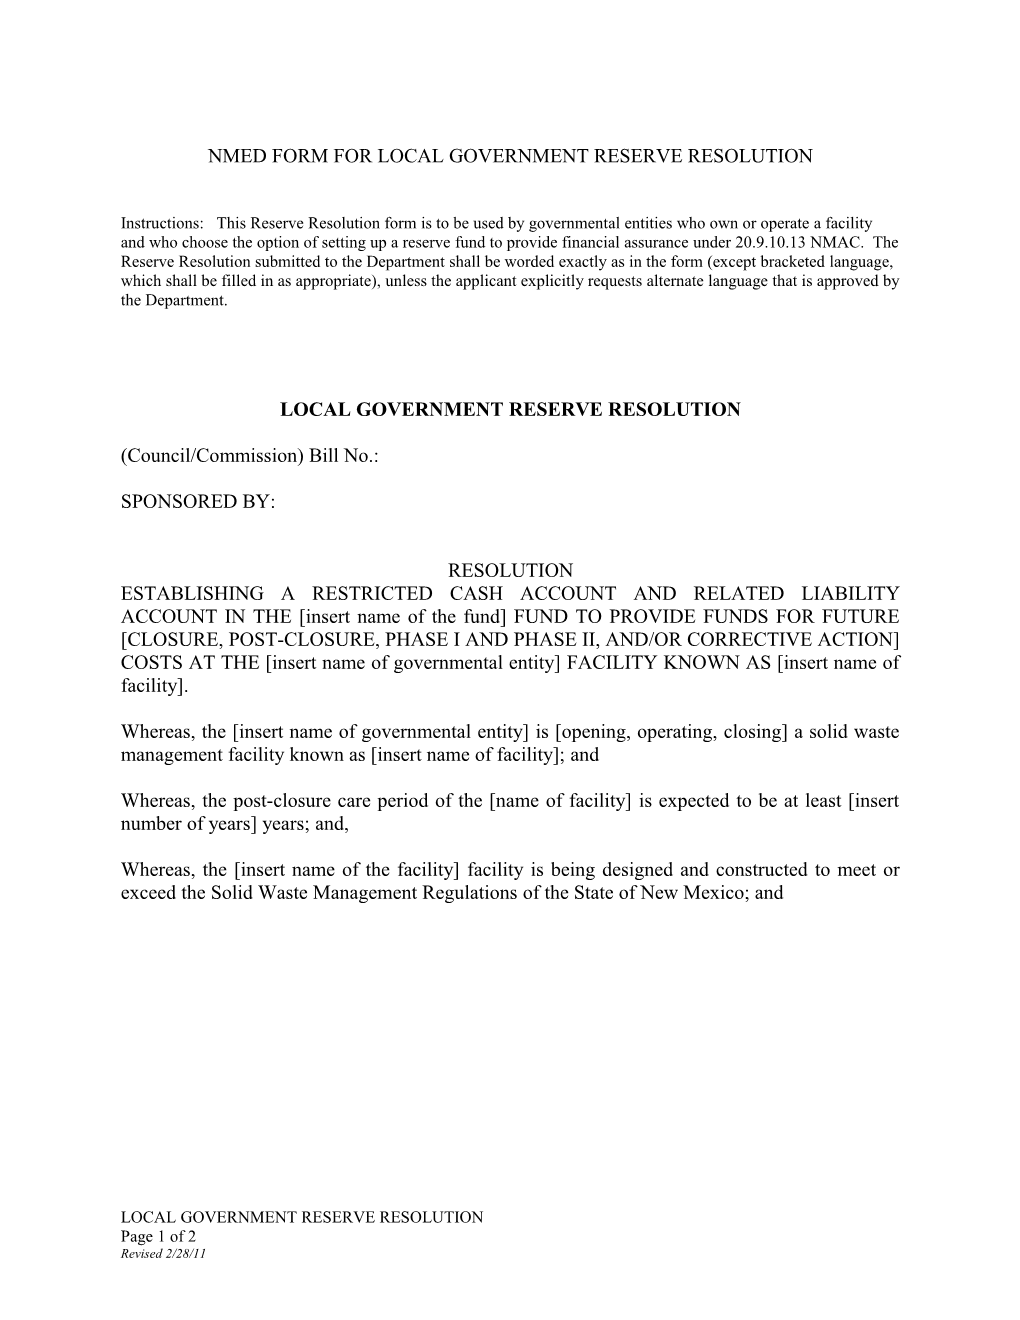 Nmed Form for Local Government Reserve Resolution